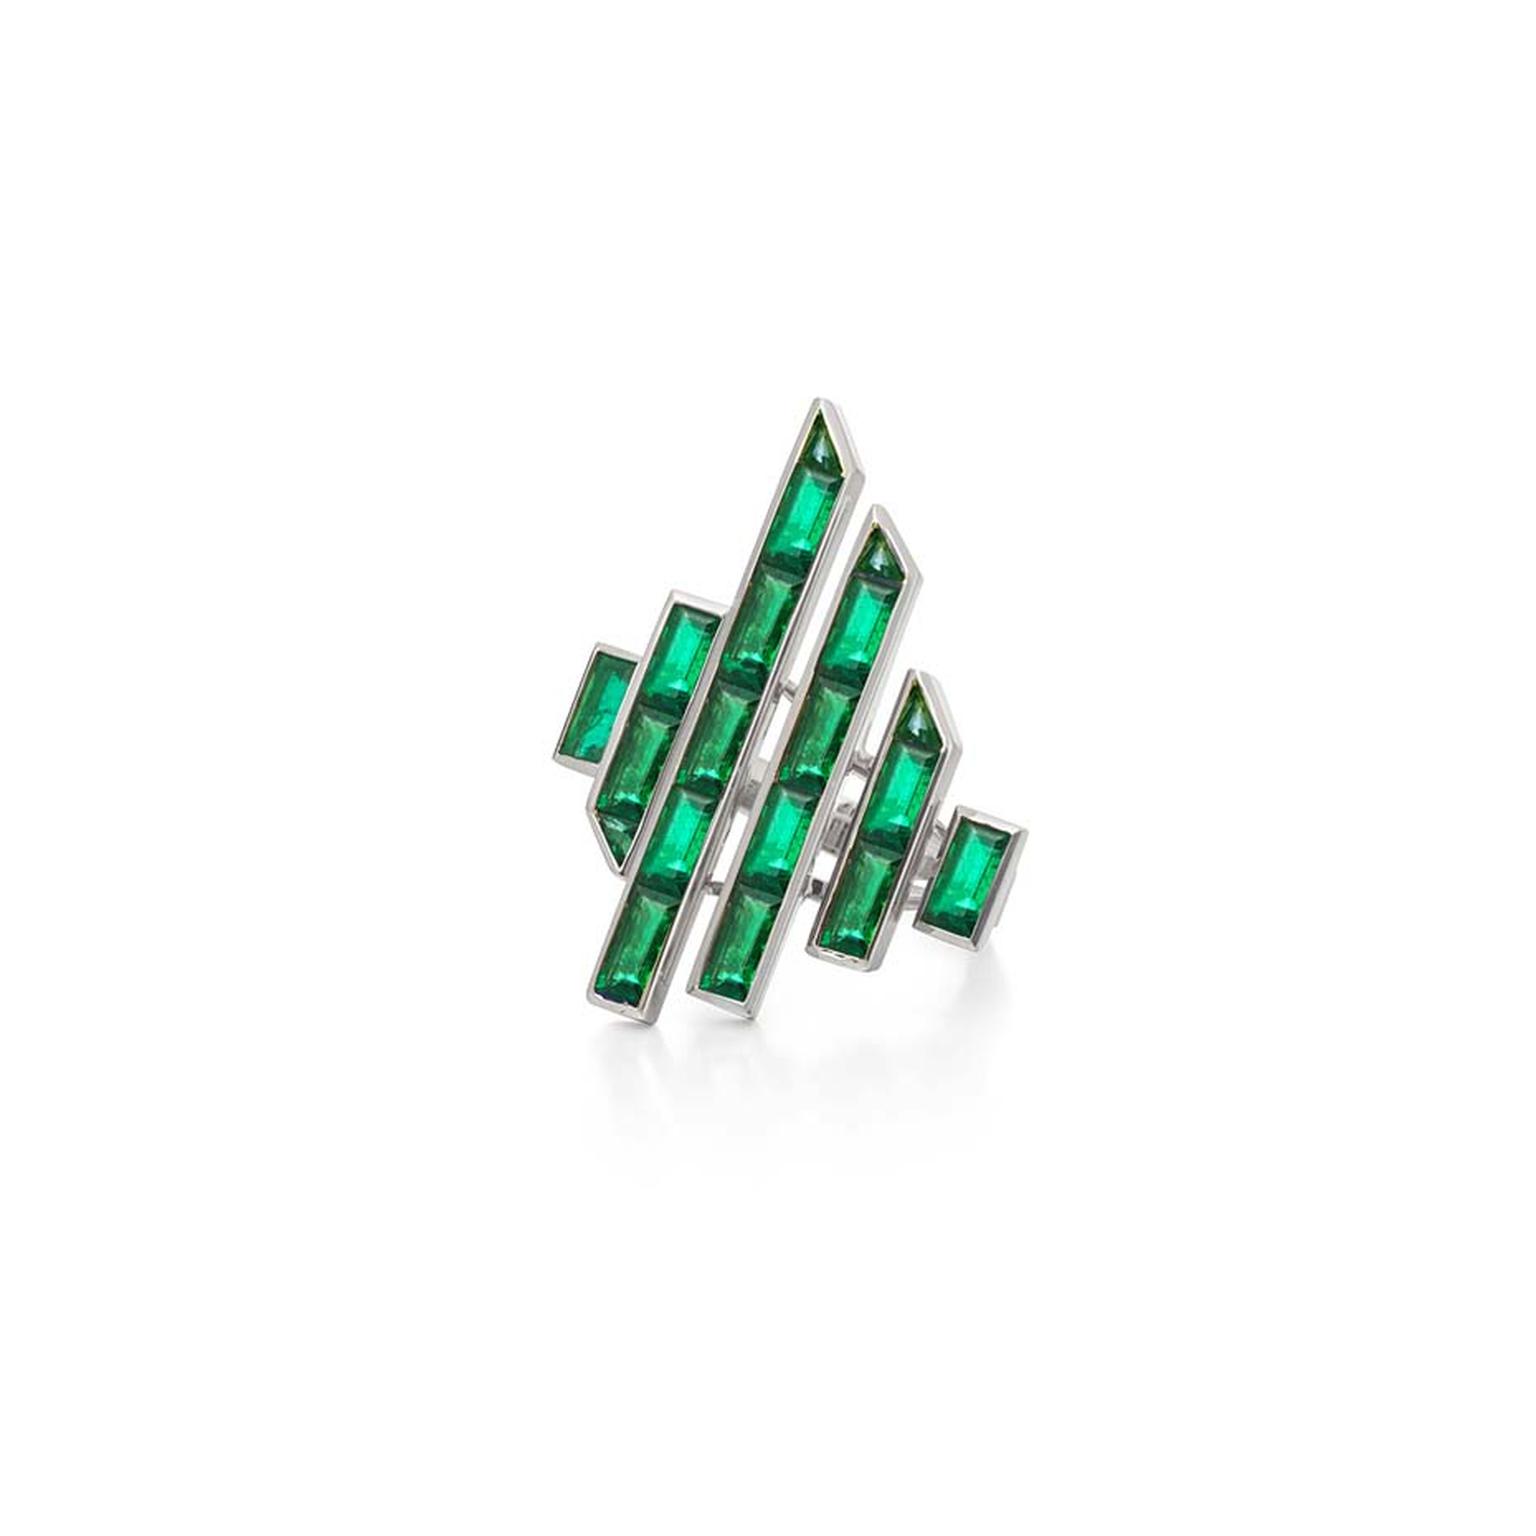 Art deco style Tomasz Donocik emerald ring, from the new Electric Night collection.